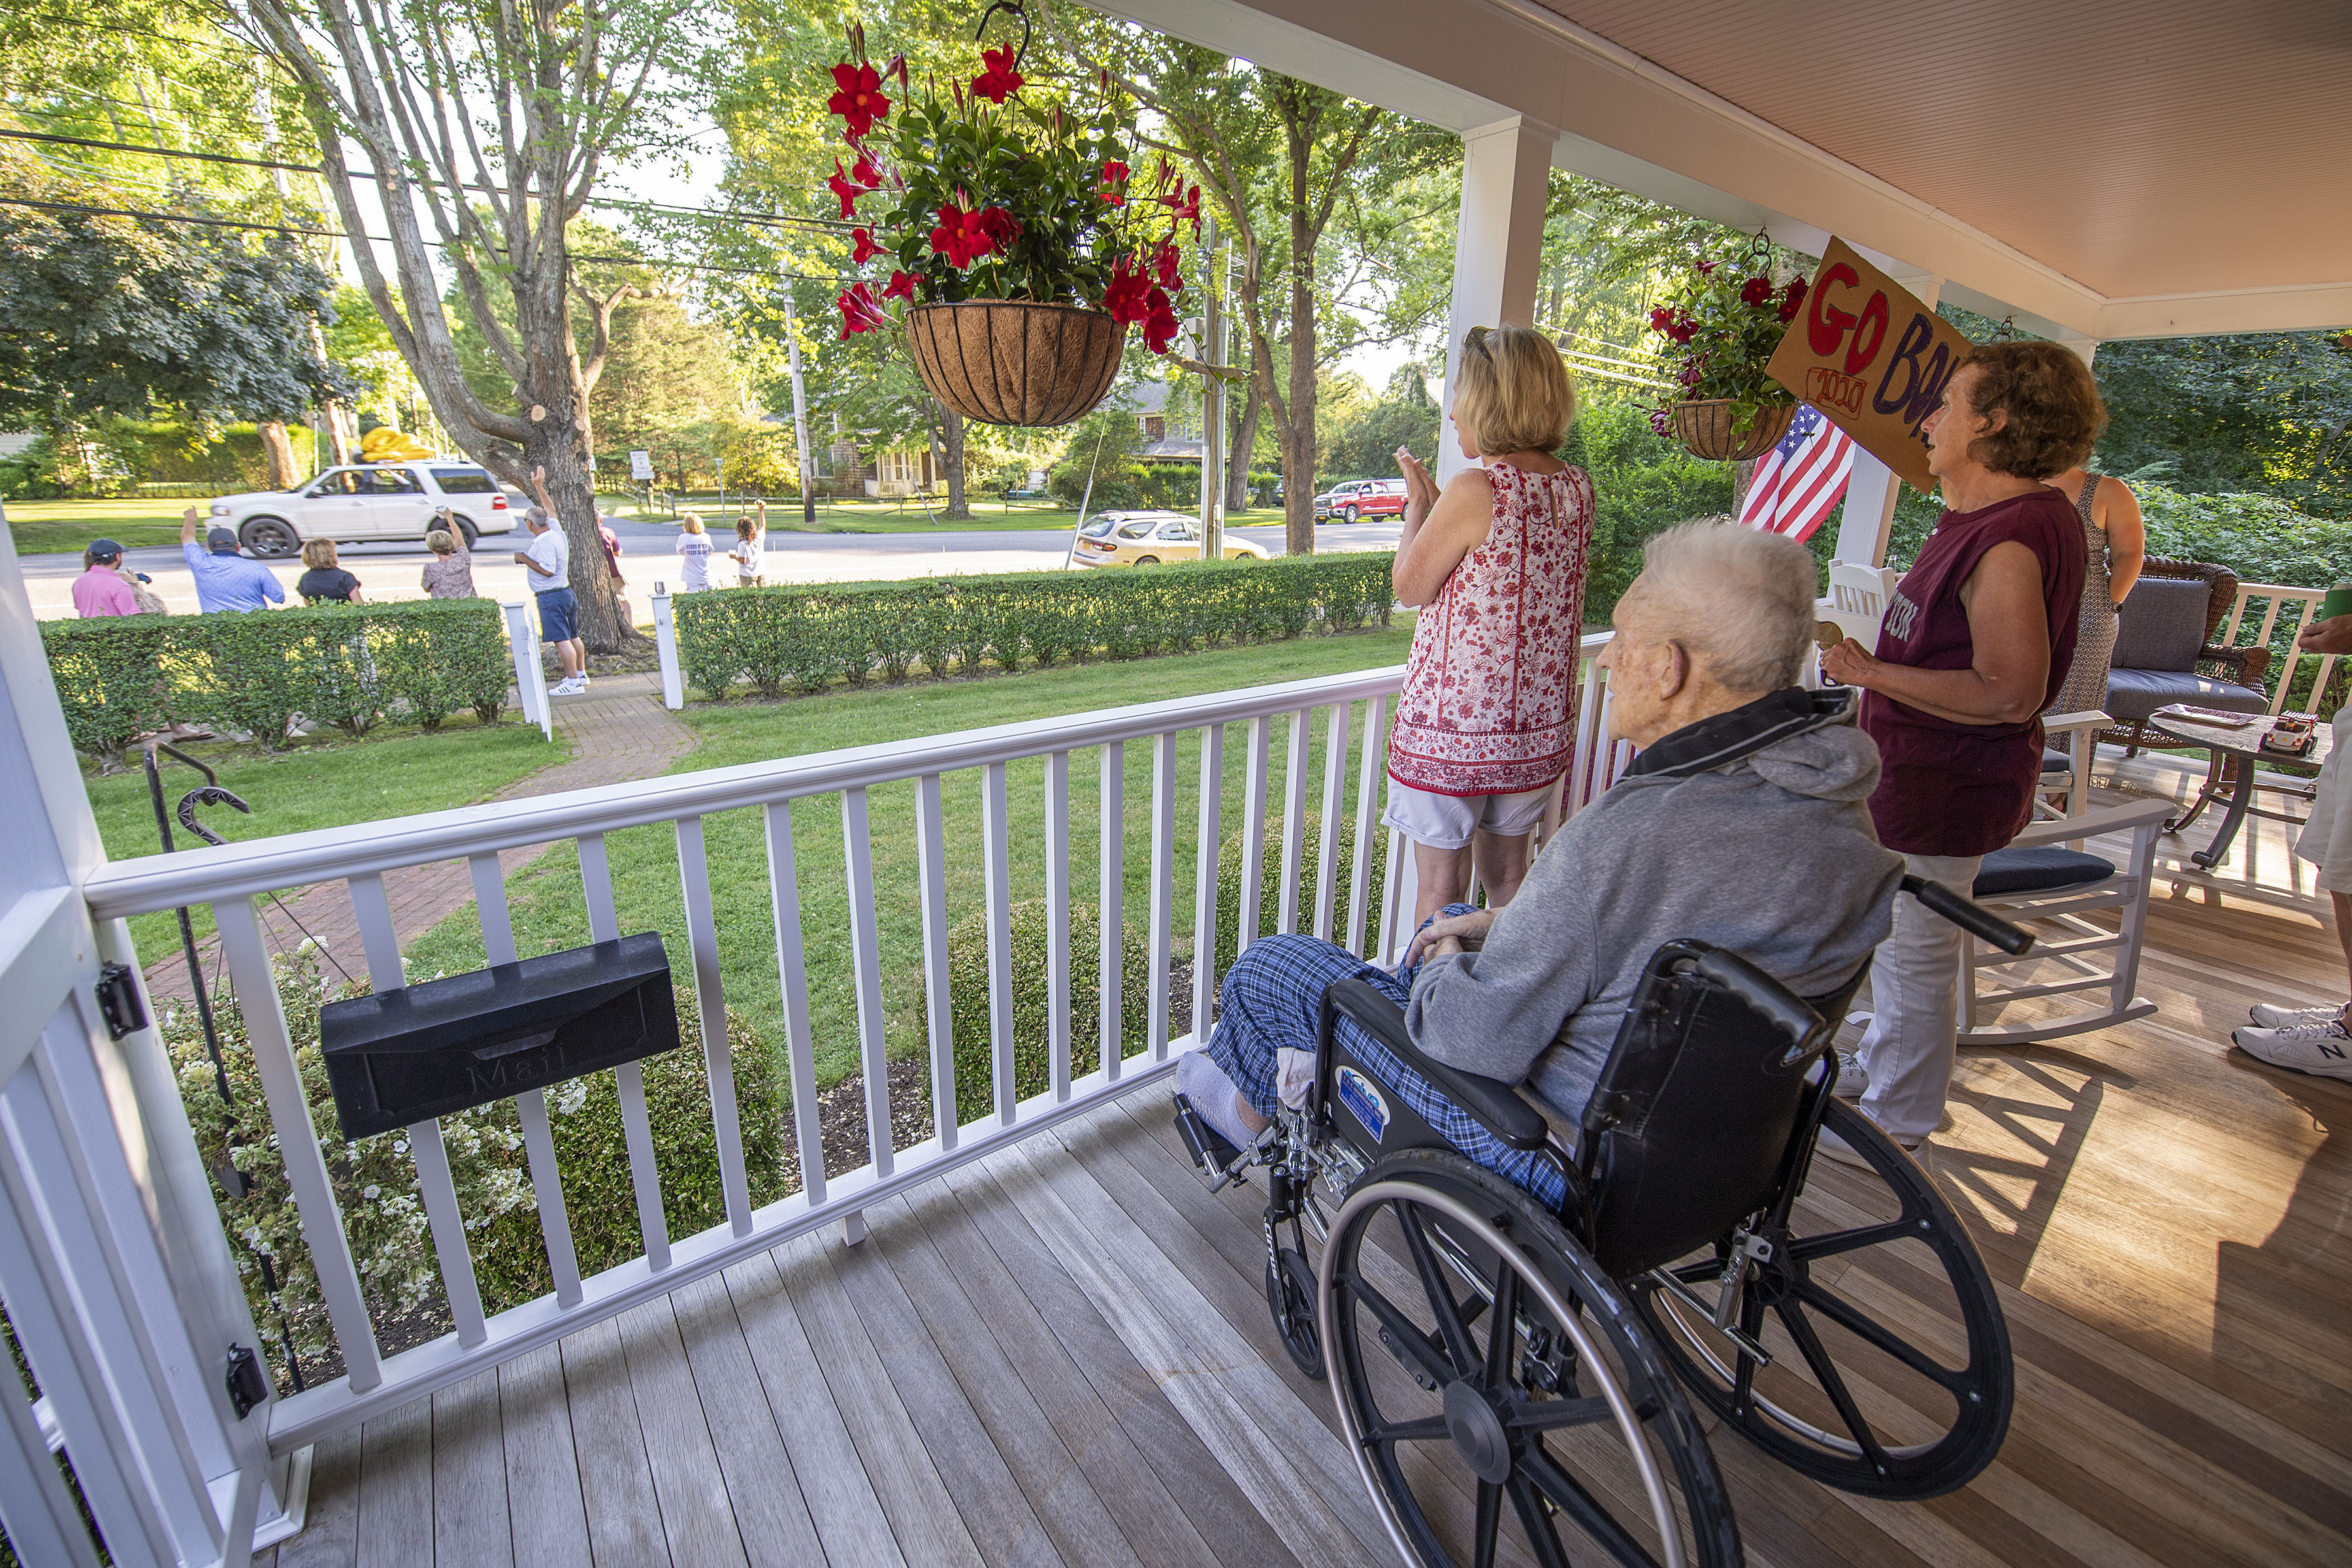 Eighty- three-year-old John McGuirk, Sr. watches the parade of passing East Hampton High School graduates from his front porch on Newtown Lane following the 2020 graduation ceremony at the East Hampton High School on Friday.